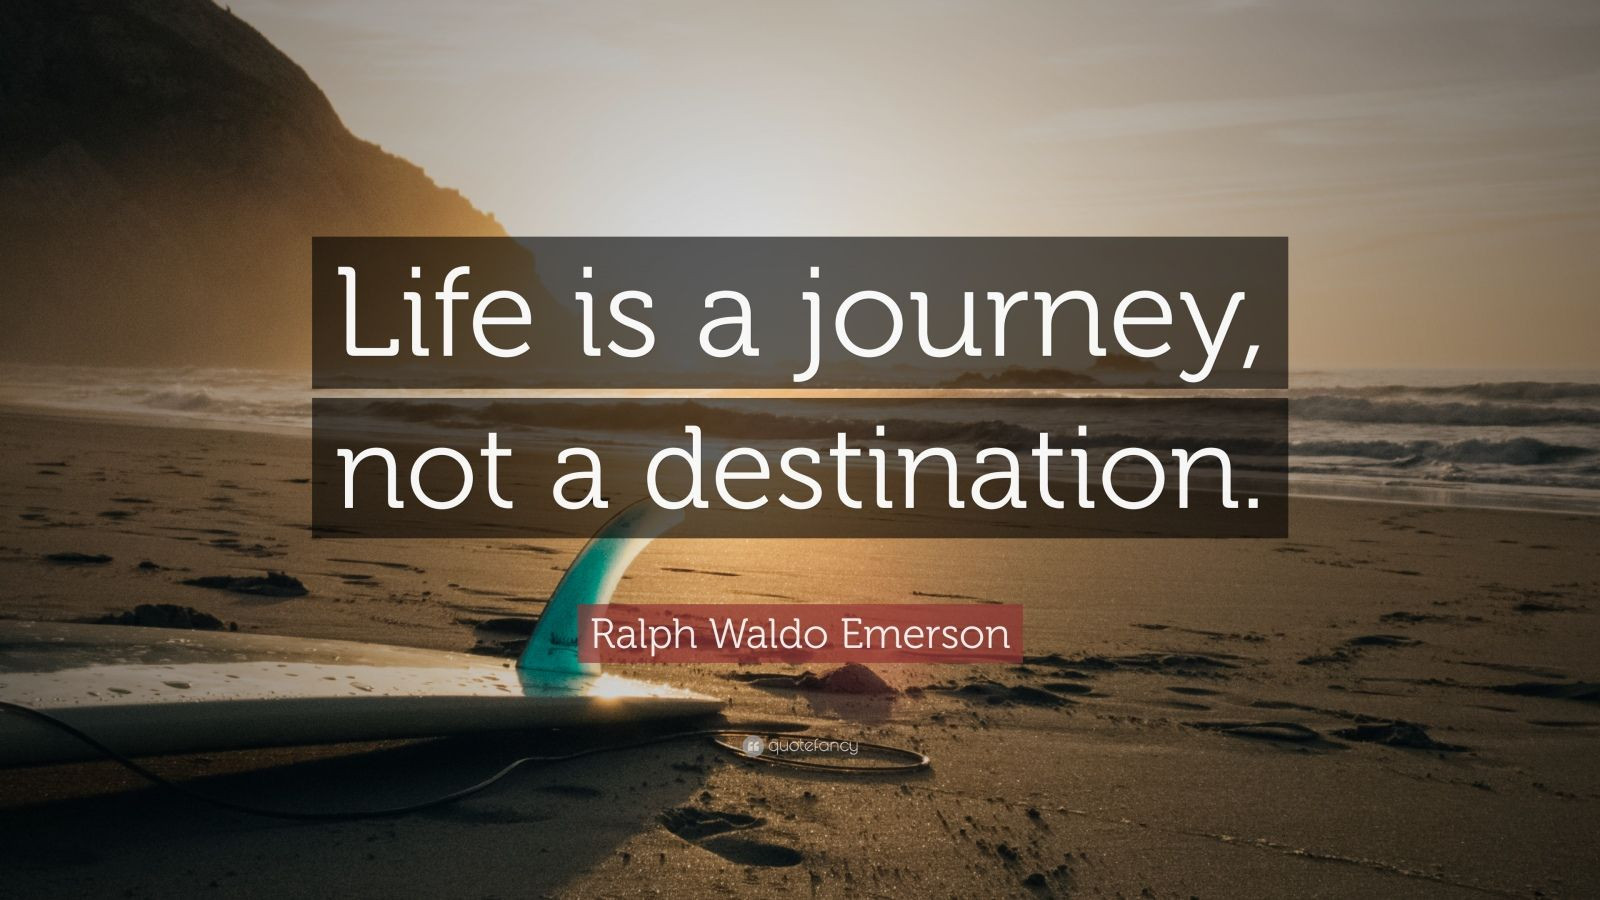 Quotes On Lifes Journey
 Ralph Waldo Emerson Quote “Life is a journey not a